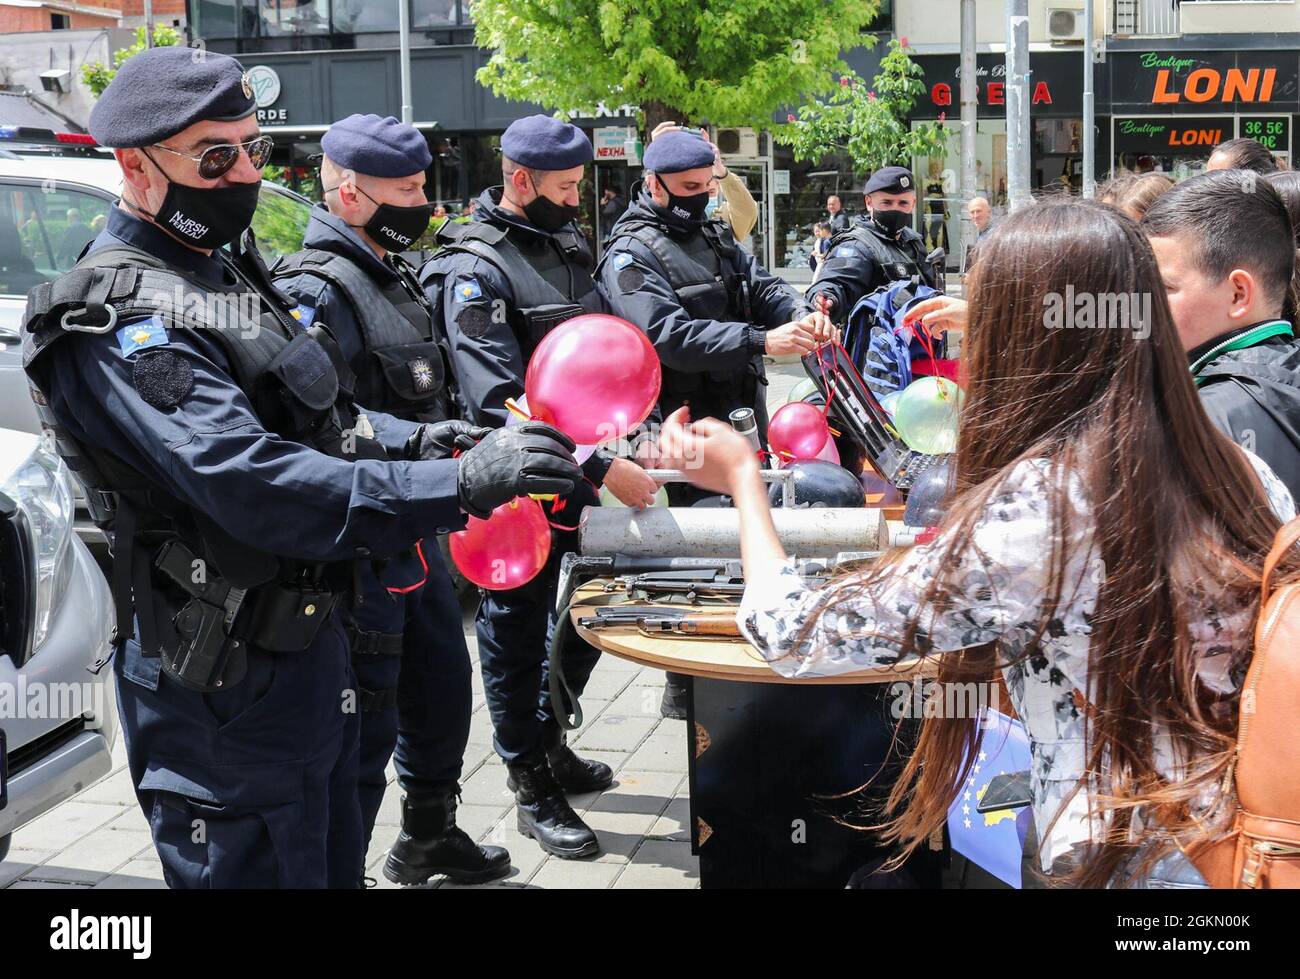 A Kosovo Police officer gives a balloon to a child during an observance of  International Children's Day in Ferizaj/Urosevac, Kosovo, on June 1, 2021.  The U.S. Kilo 21 Liaison Monitoring Team, based